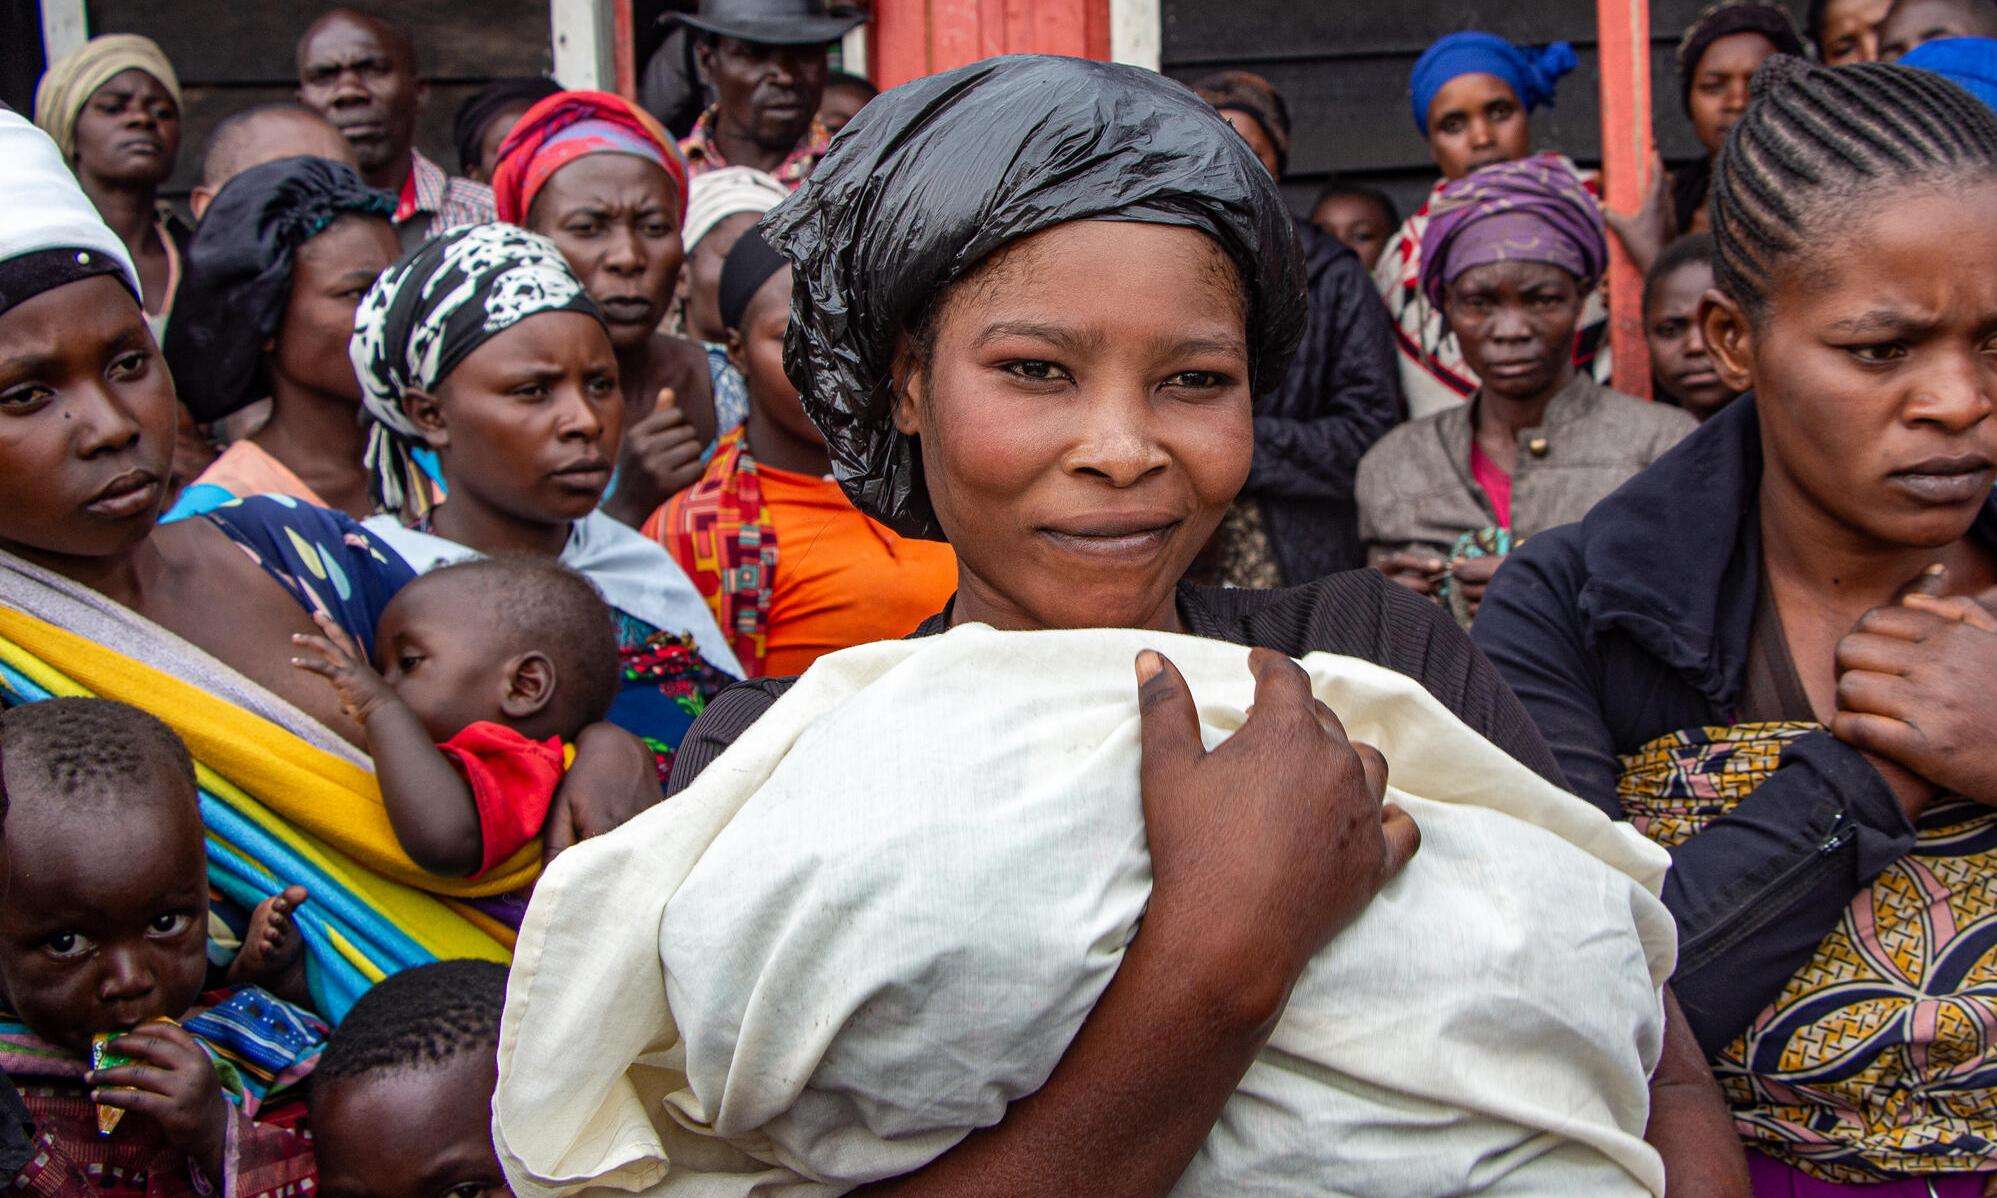 A Congolese woman holding a baby wrapped in a blanket in DR Congo.